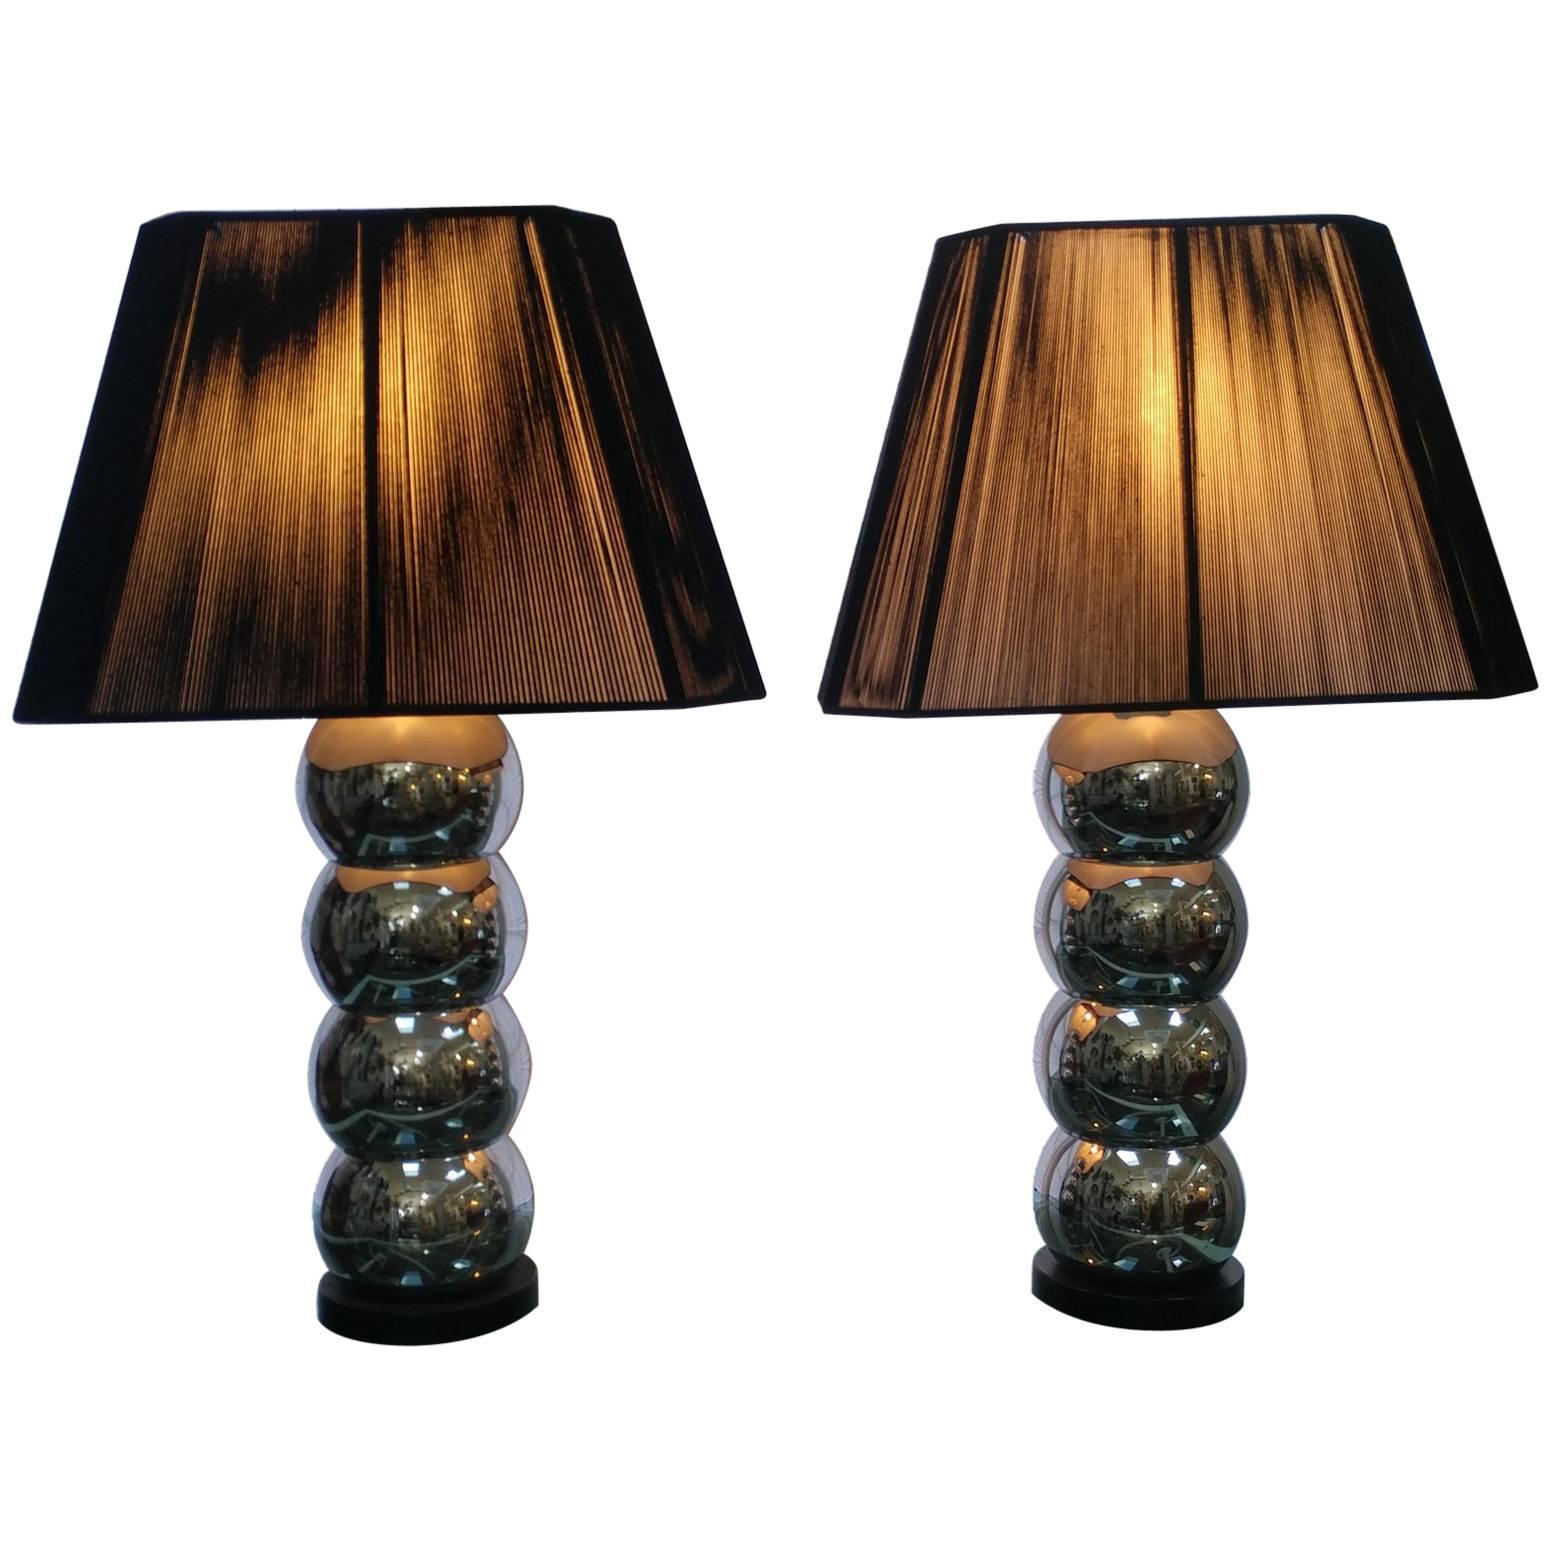 Pair of Stacked Spheres Table Lamps with String Shades, Offered by La Porte For Sale